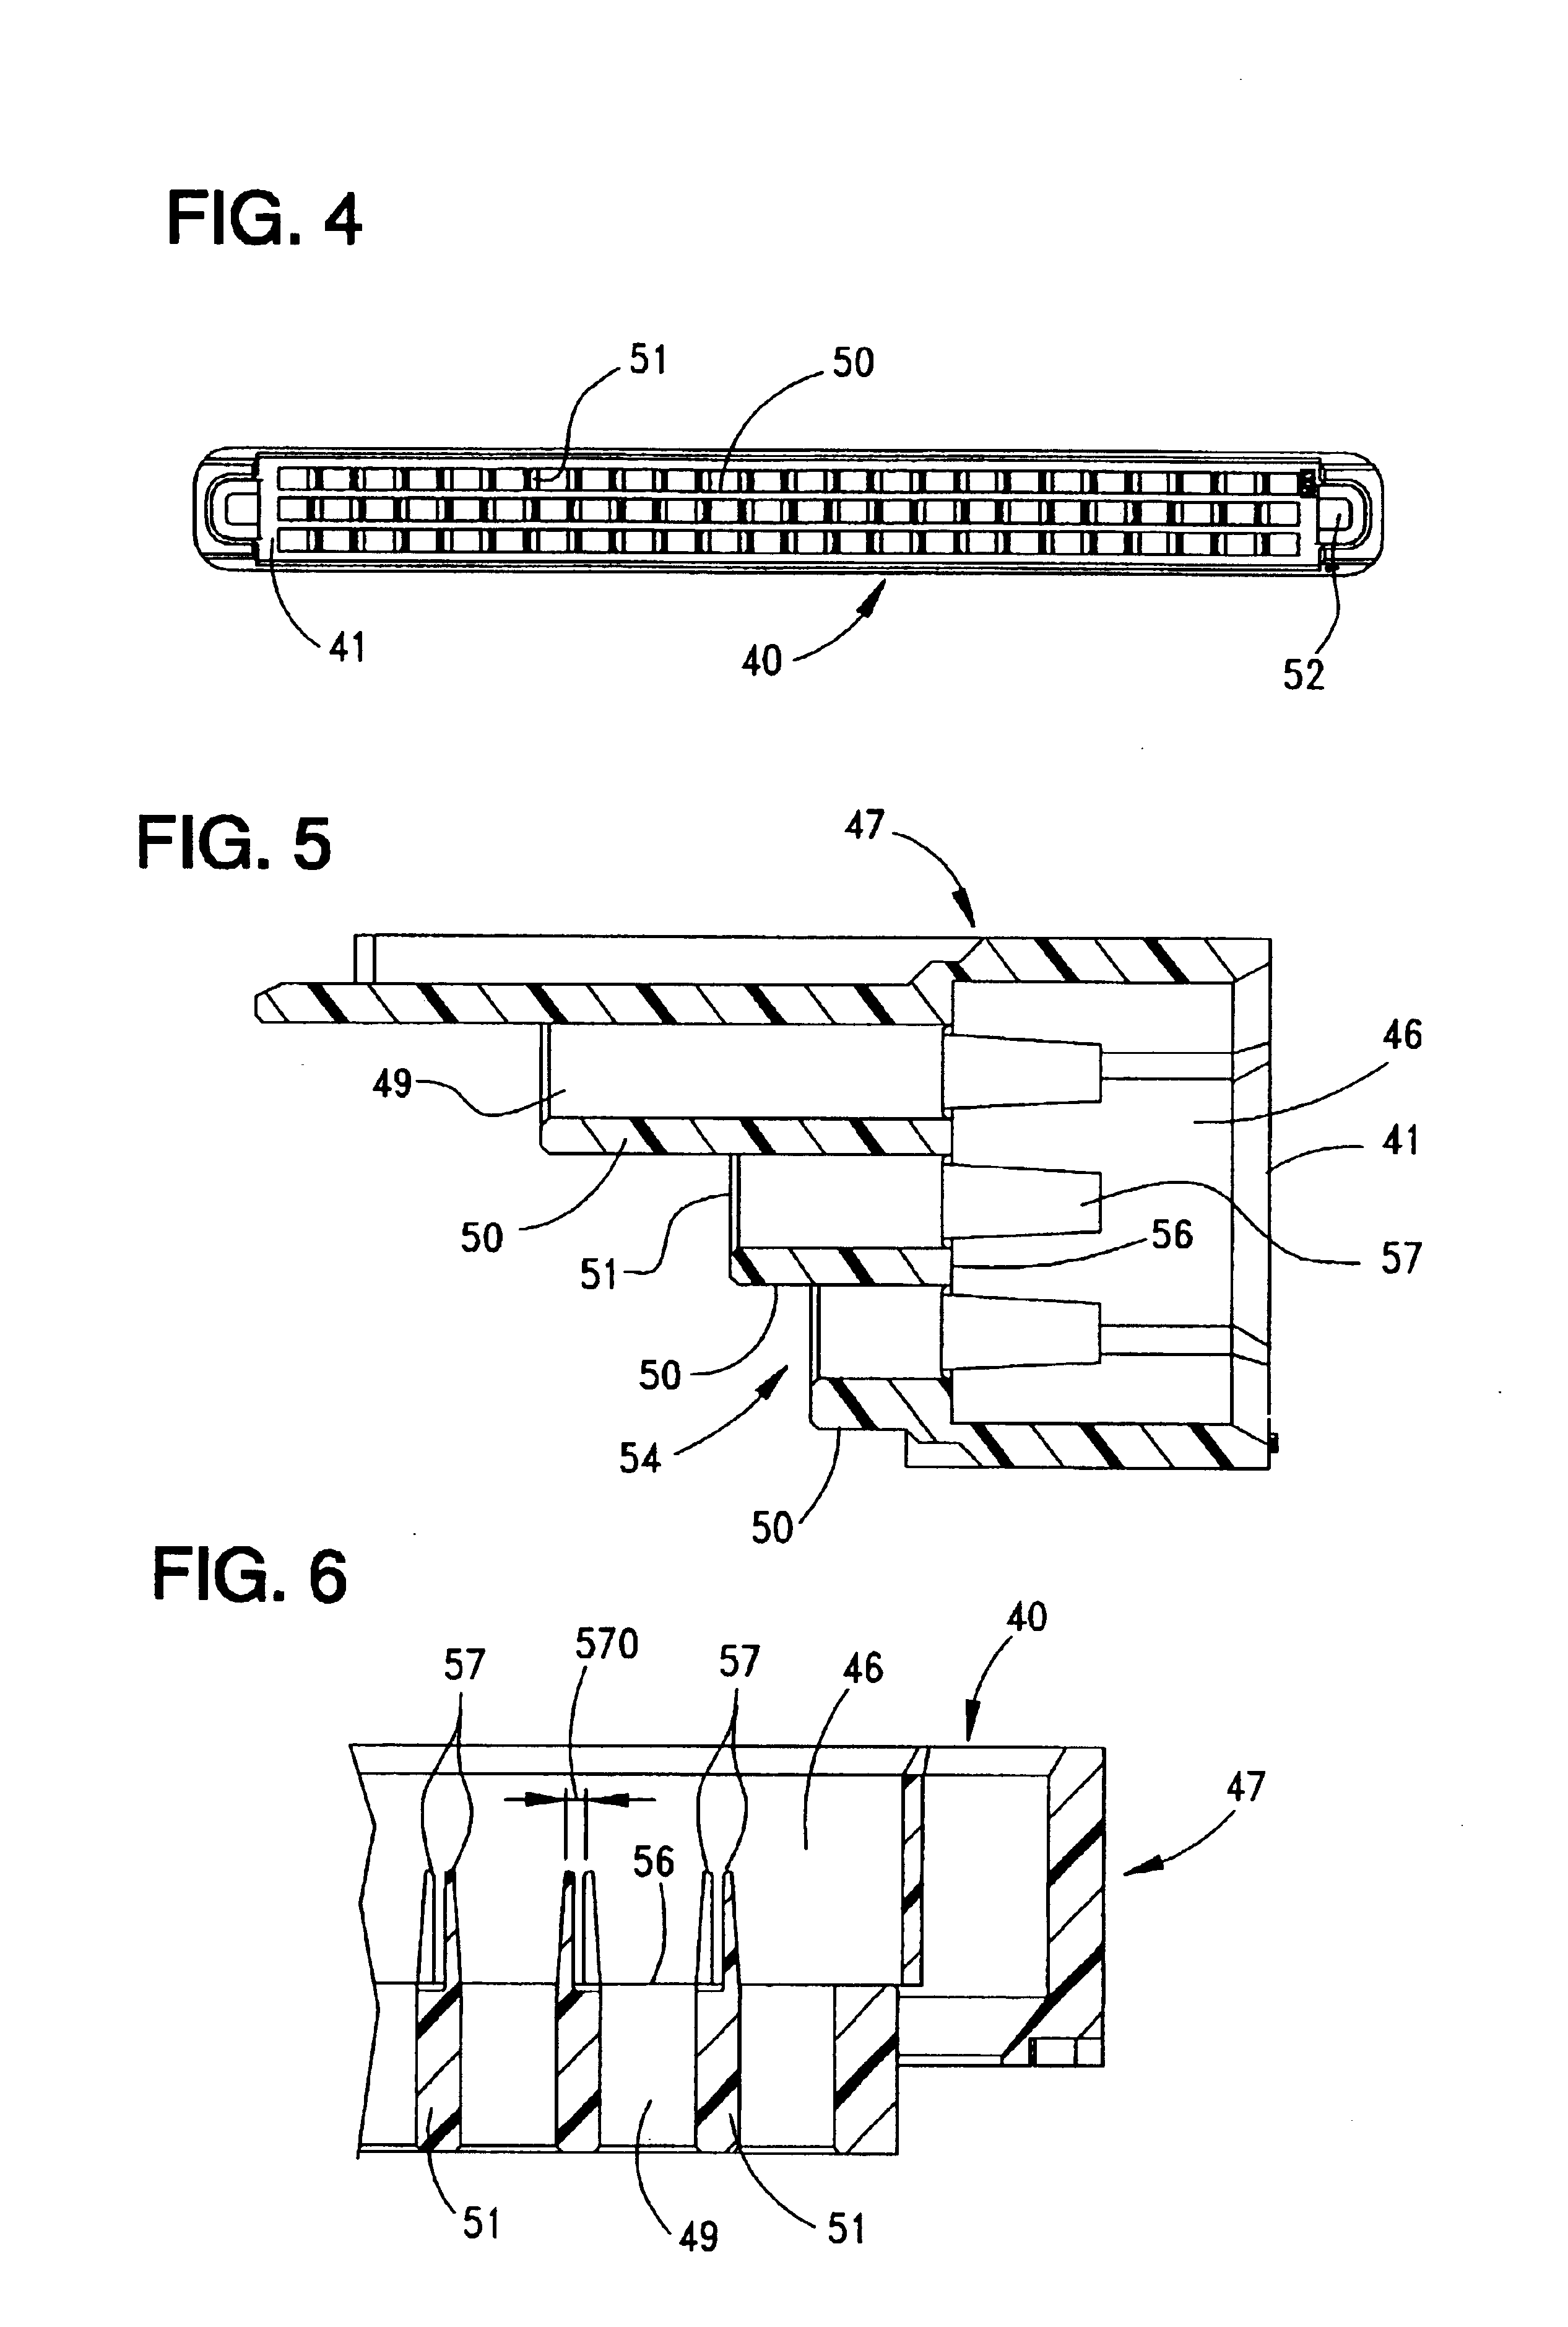 High-speed differential signal connector with interstitial ground aspect